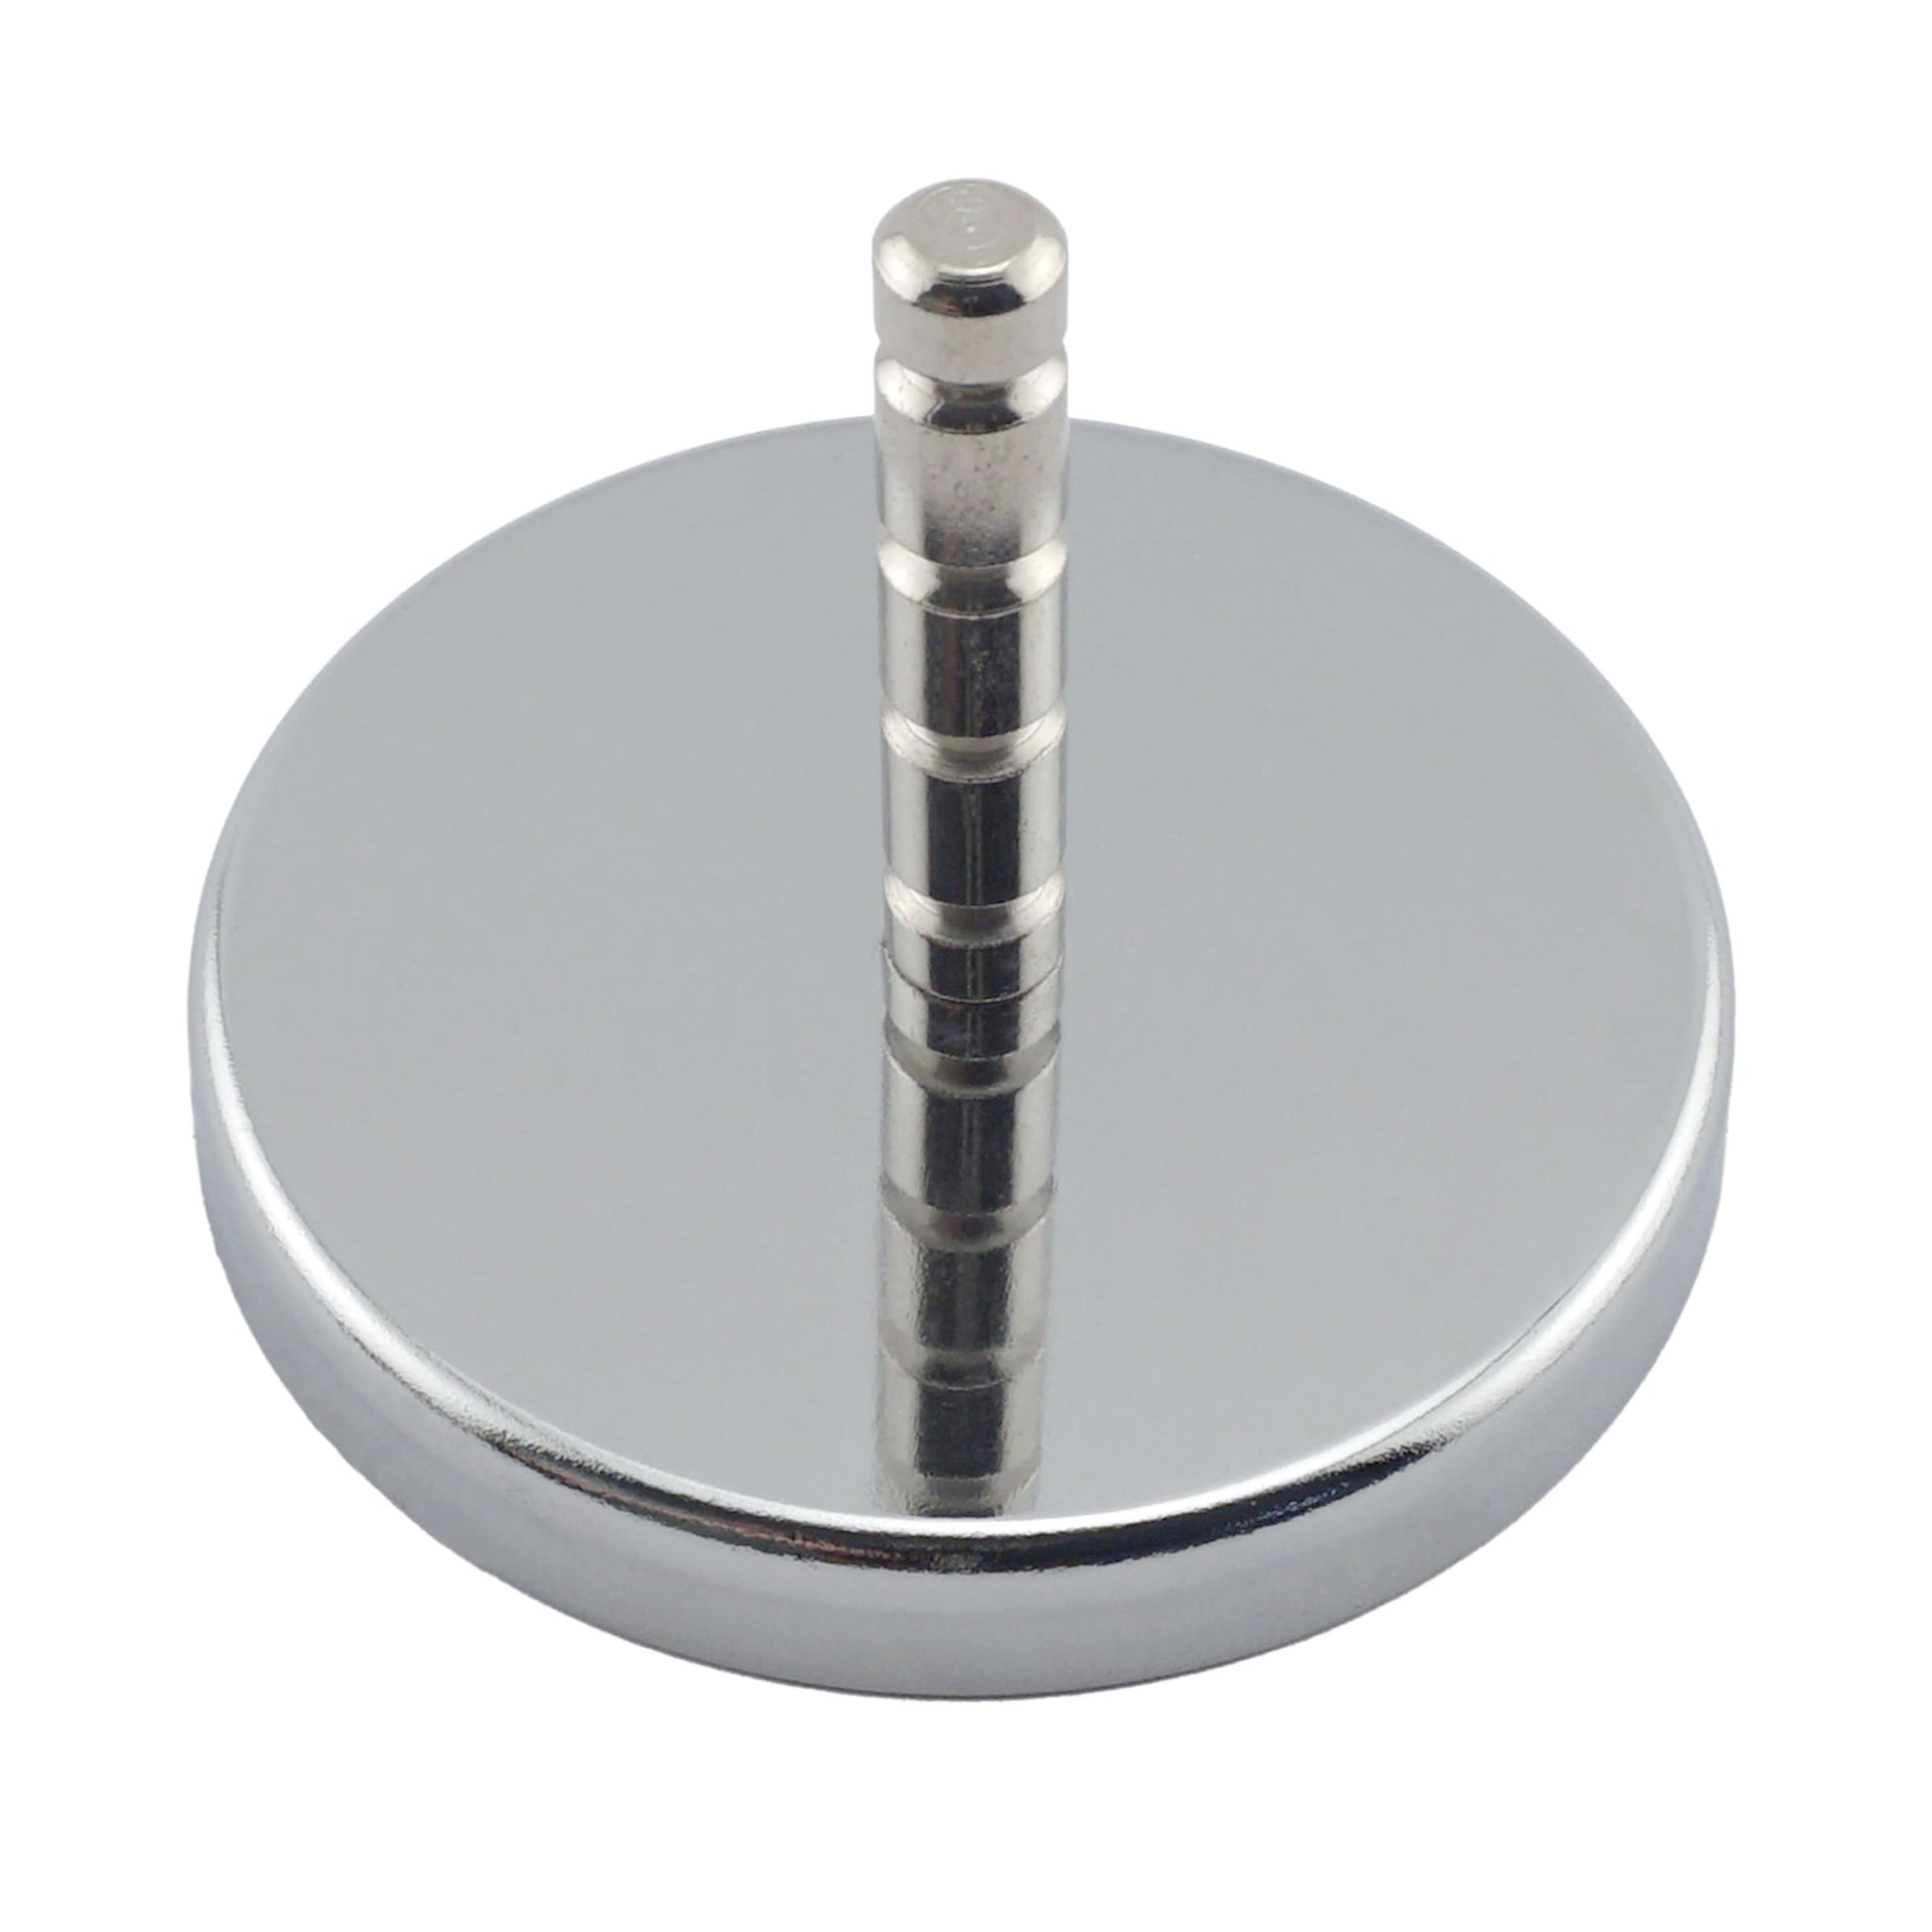 Load image into Gallery viewer, RB80POST Heavy-Duty Ceramic Round Base Magnet Assembled with Grooved Post - 45 Degree Angle View